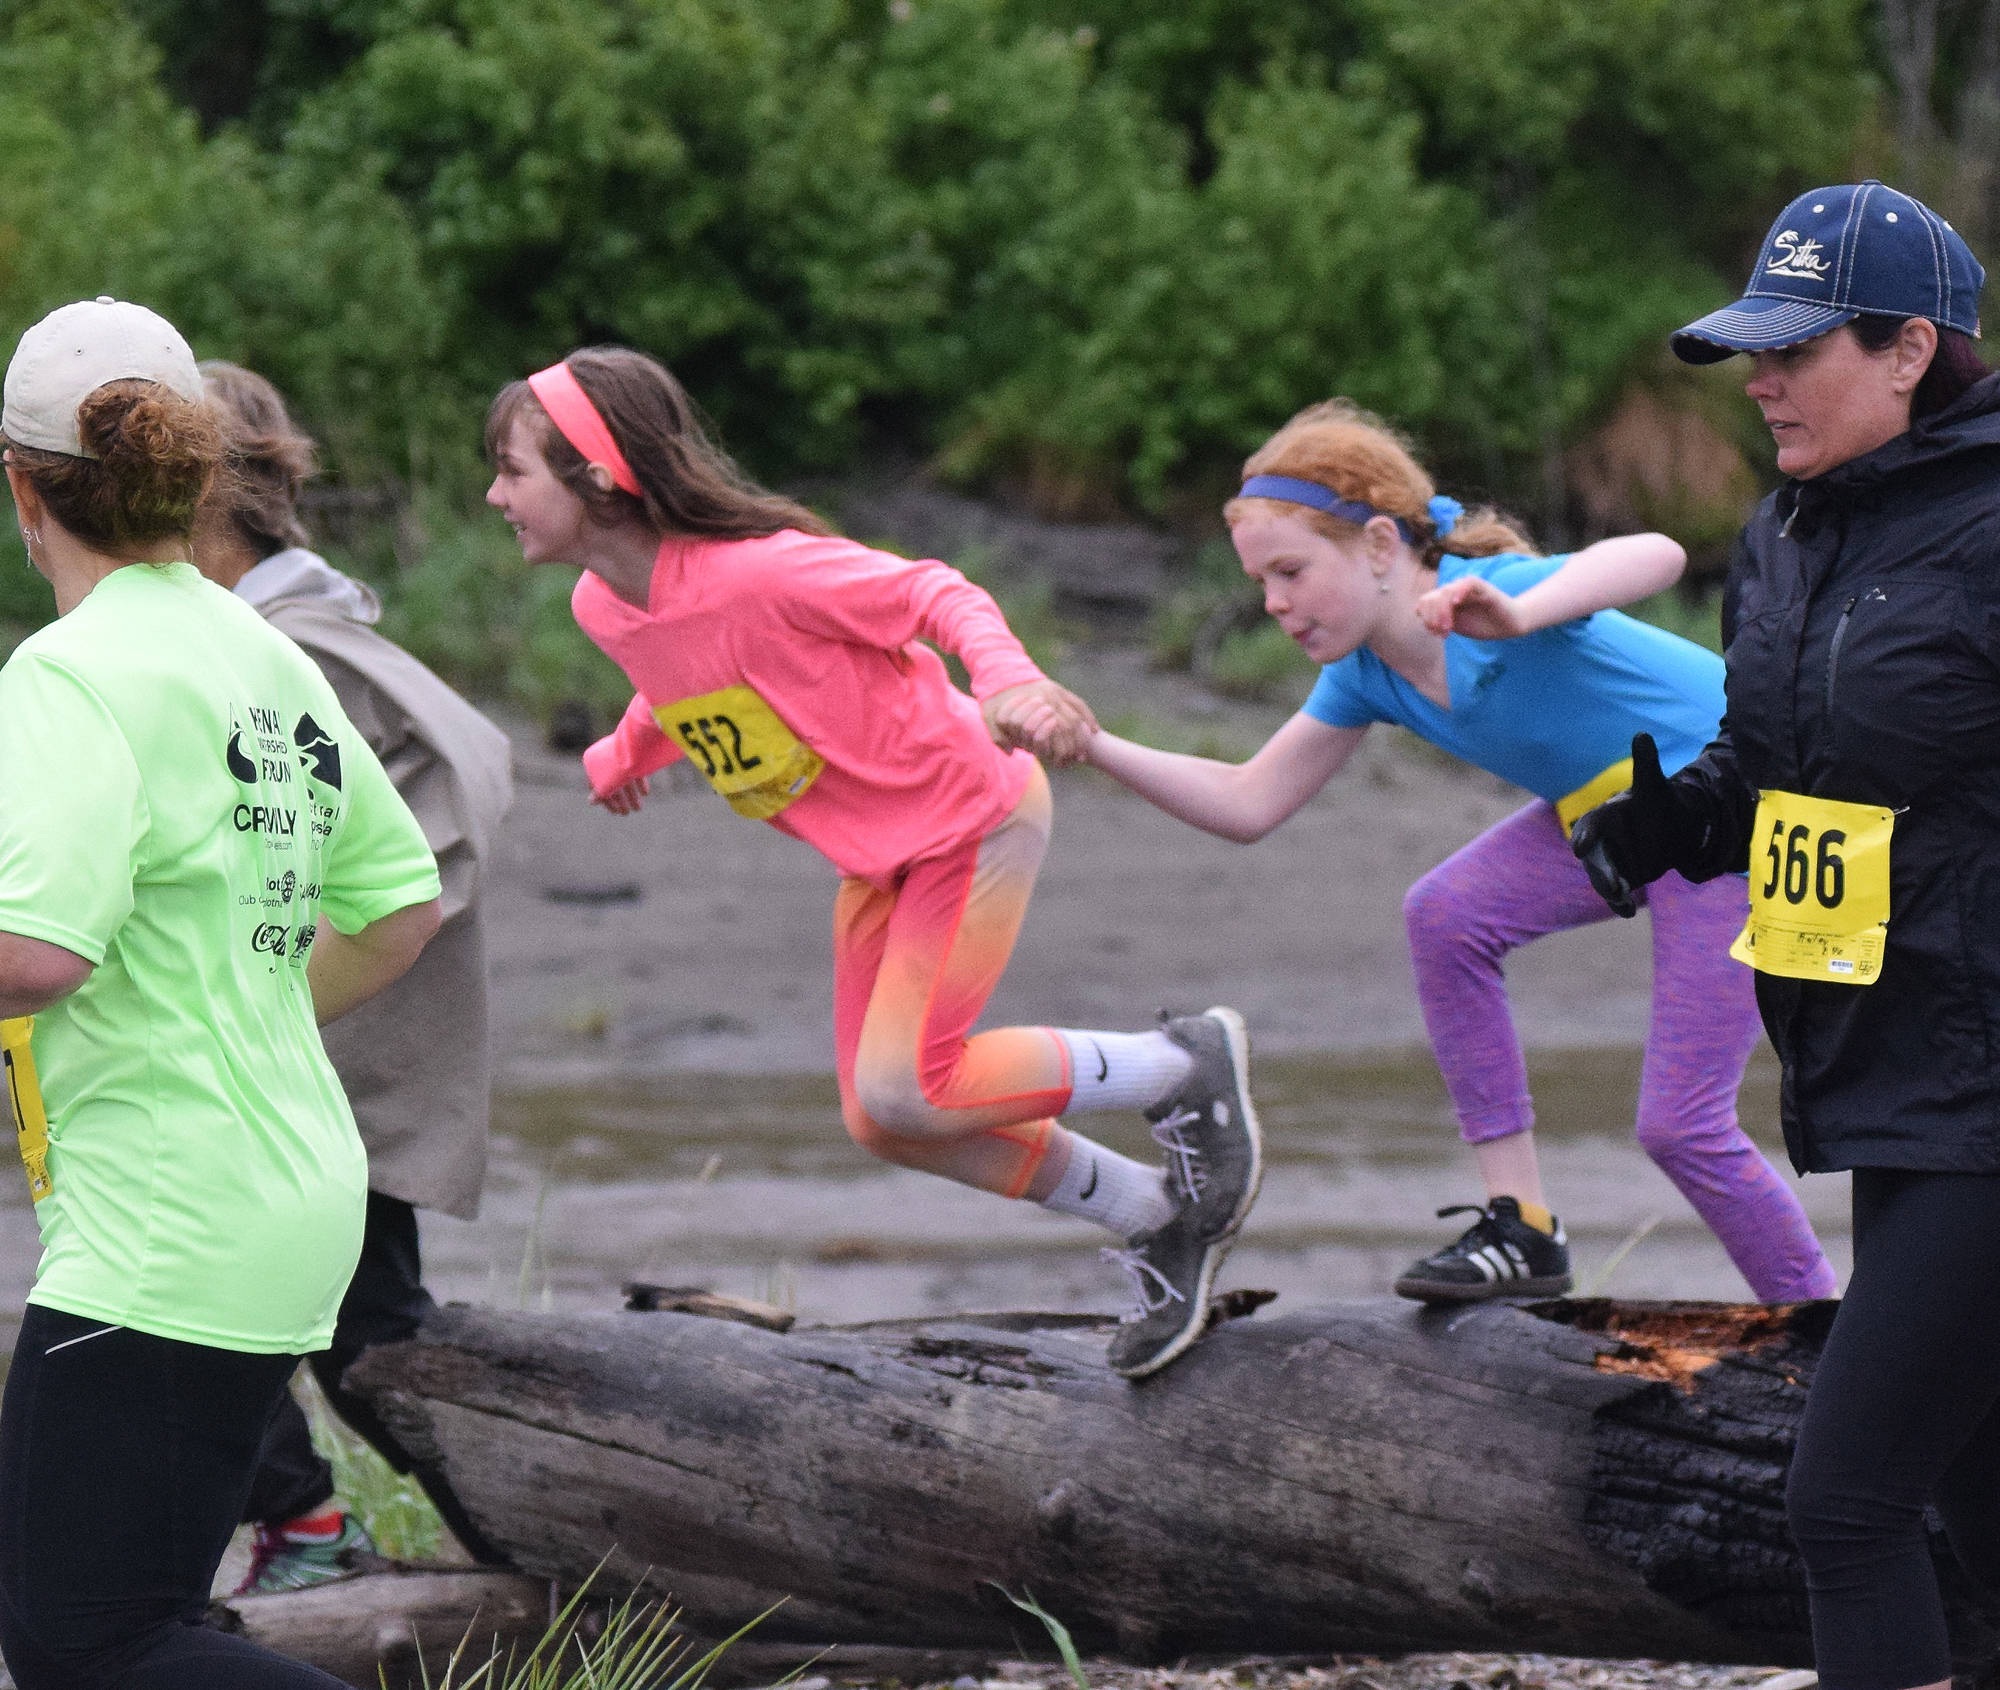 Youth runners Karalyn Viehdeffer (left) and Audrey Hobart Anderson hurdle a log together Saturday at the fourth annual Clam Scramble 5K in Ninilchik. (Photo by Joey Klecka/Peninsula Clarion)